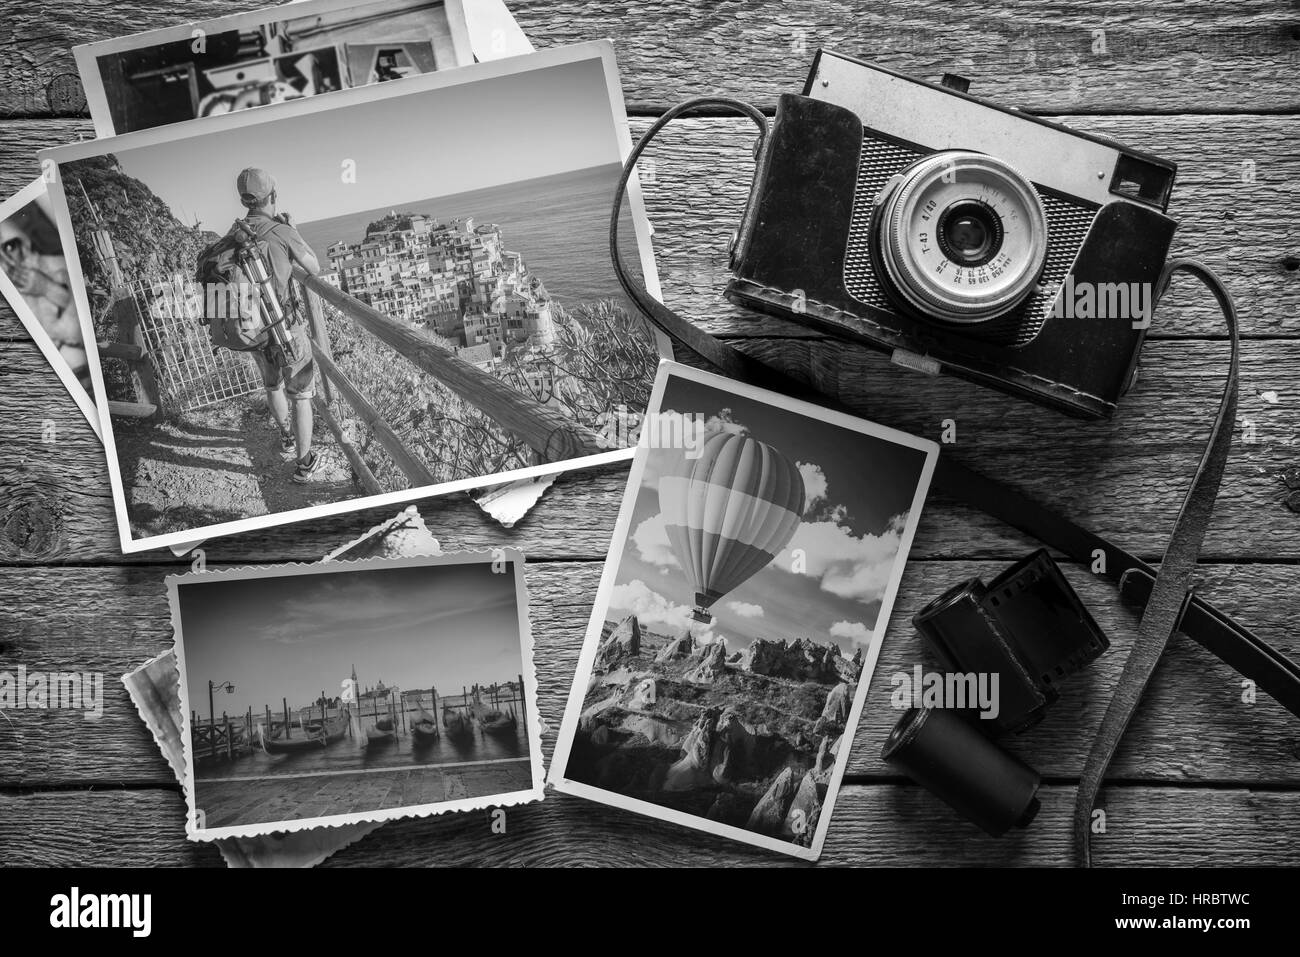 photography concept with old camera and photos Stock Photo